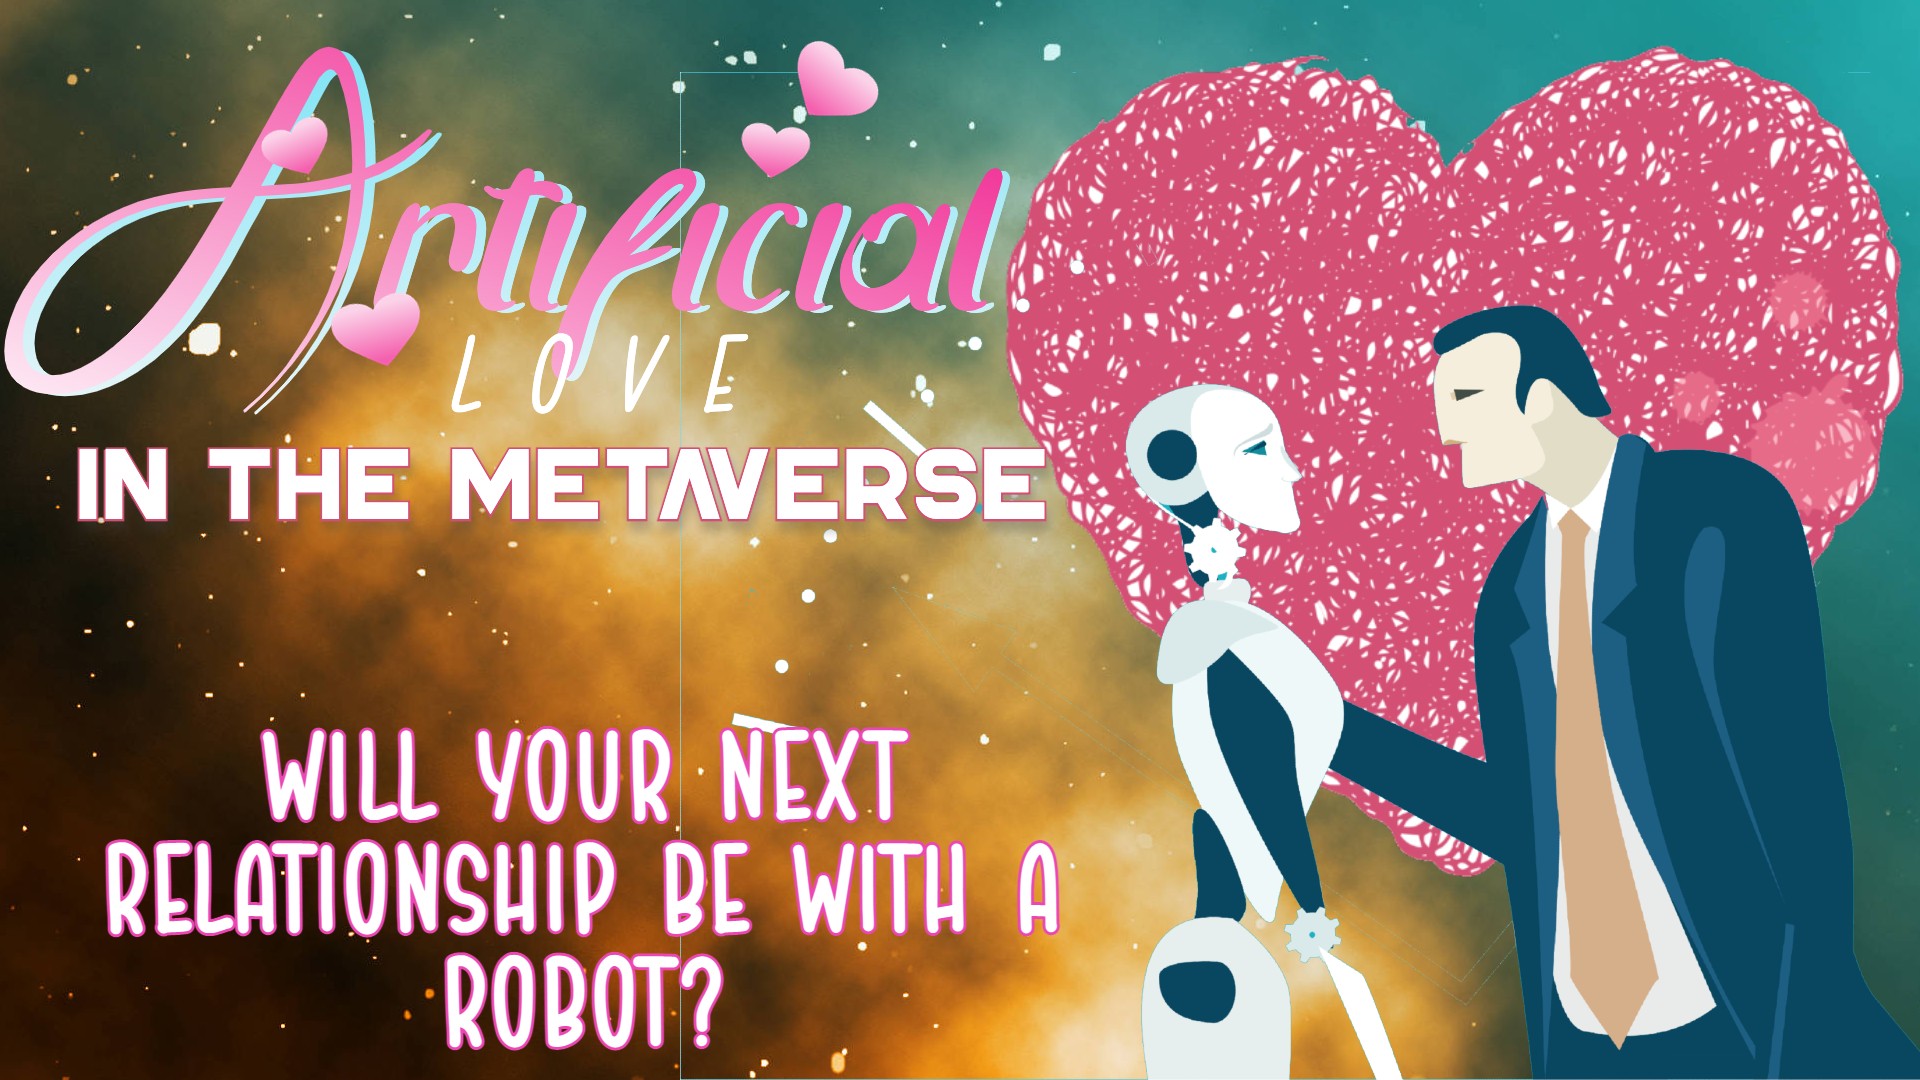 The Metaverse 112: Artificial Love in the Metaverse